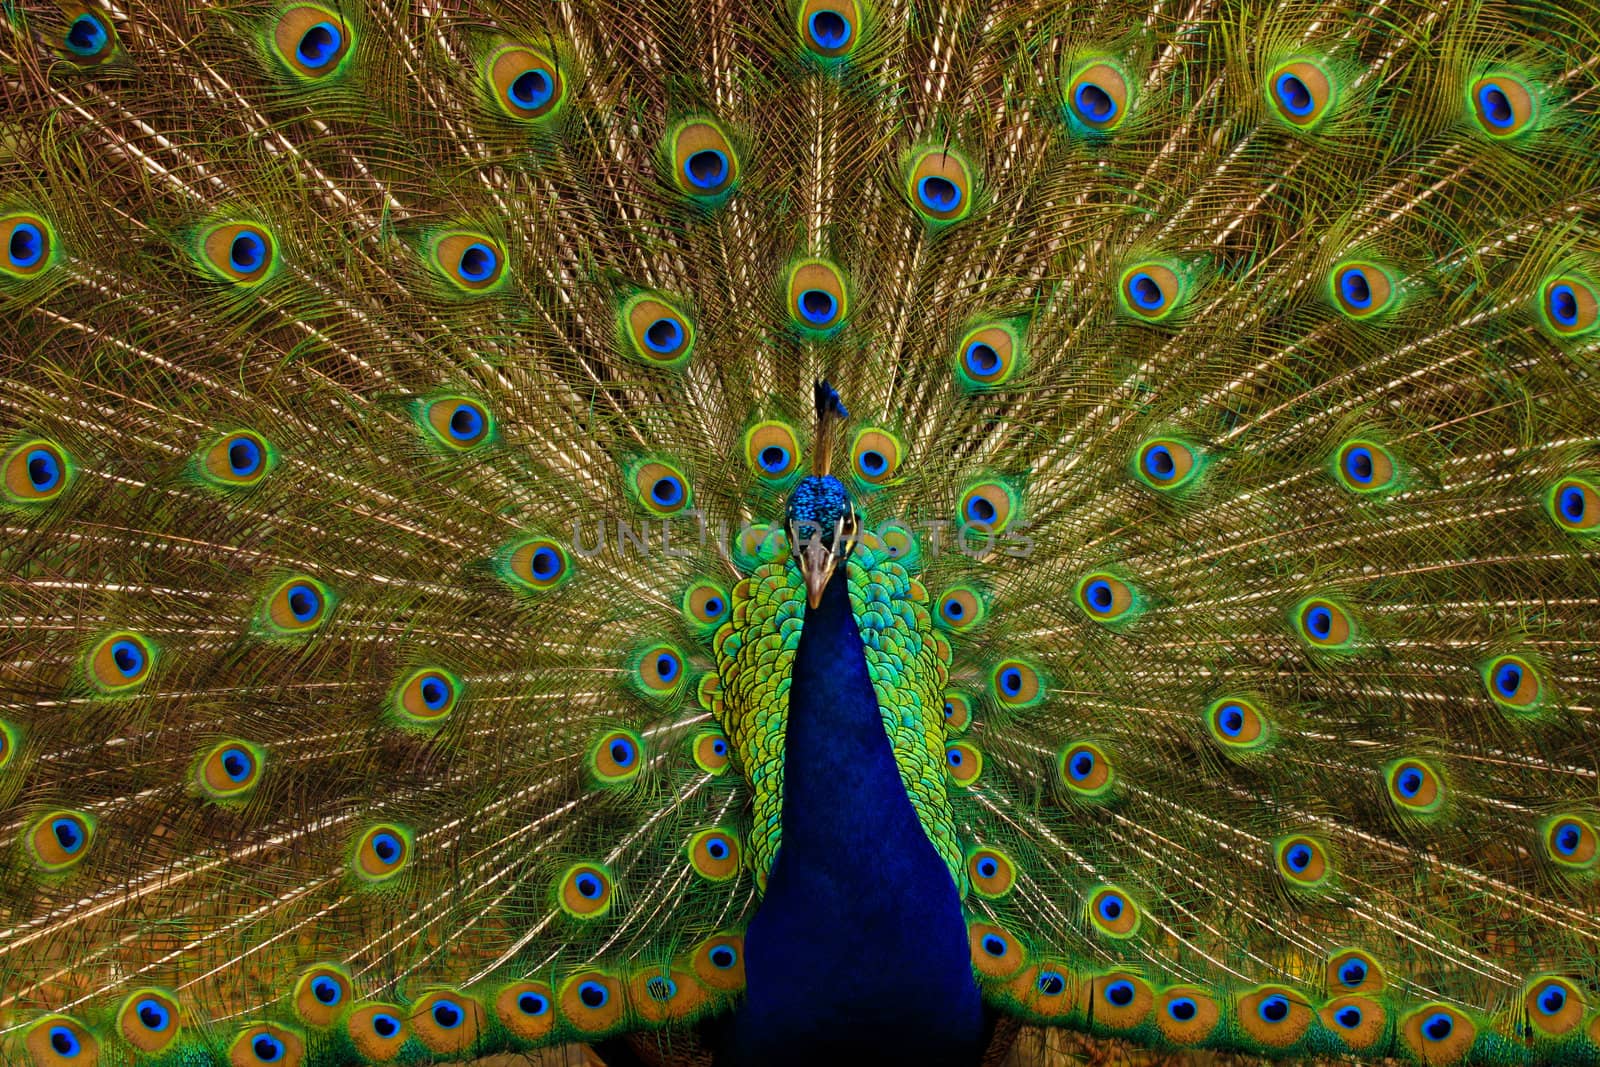 Male peacock courting a female